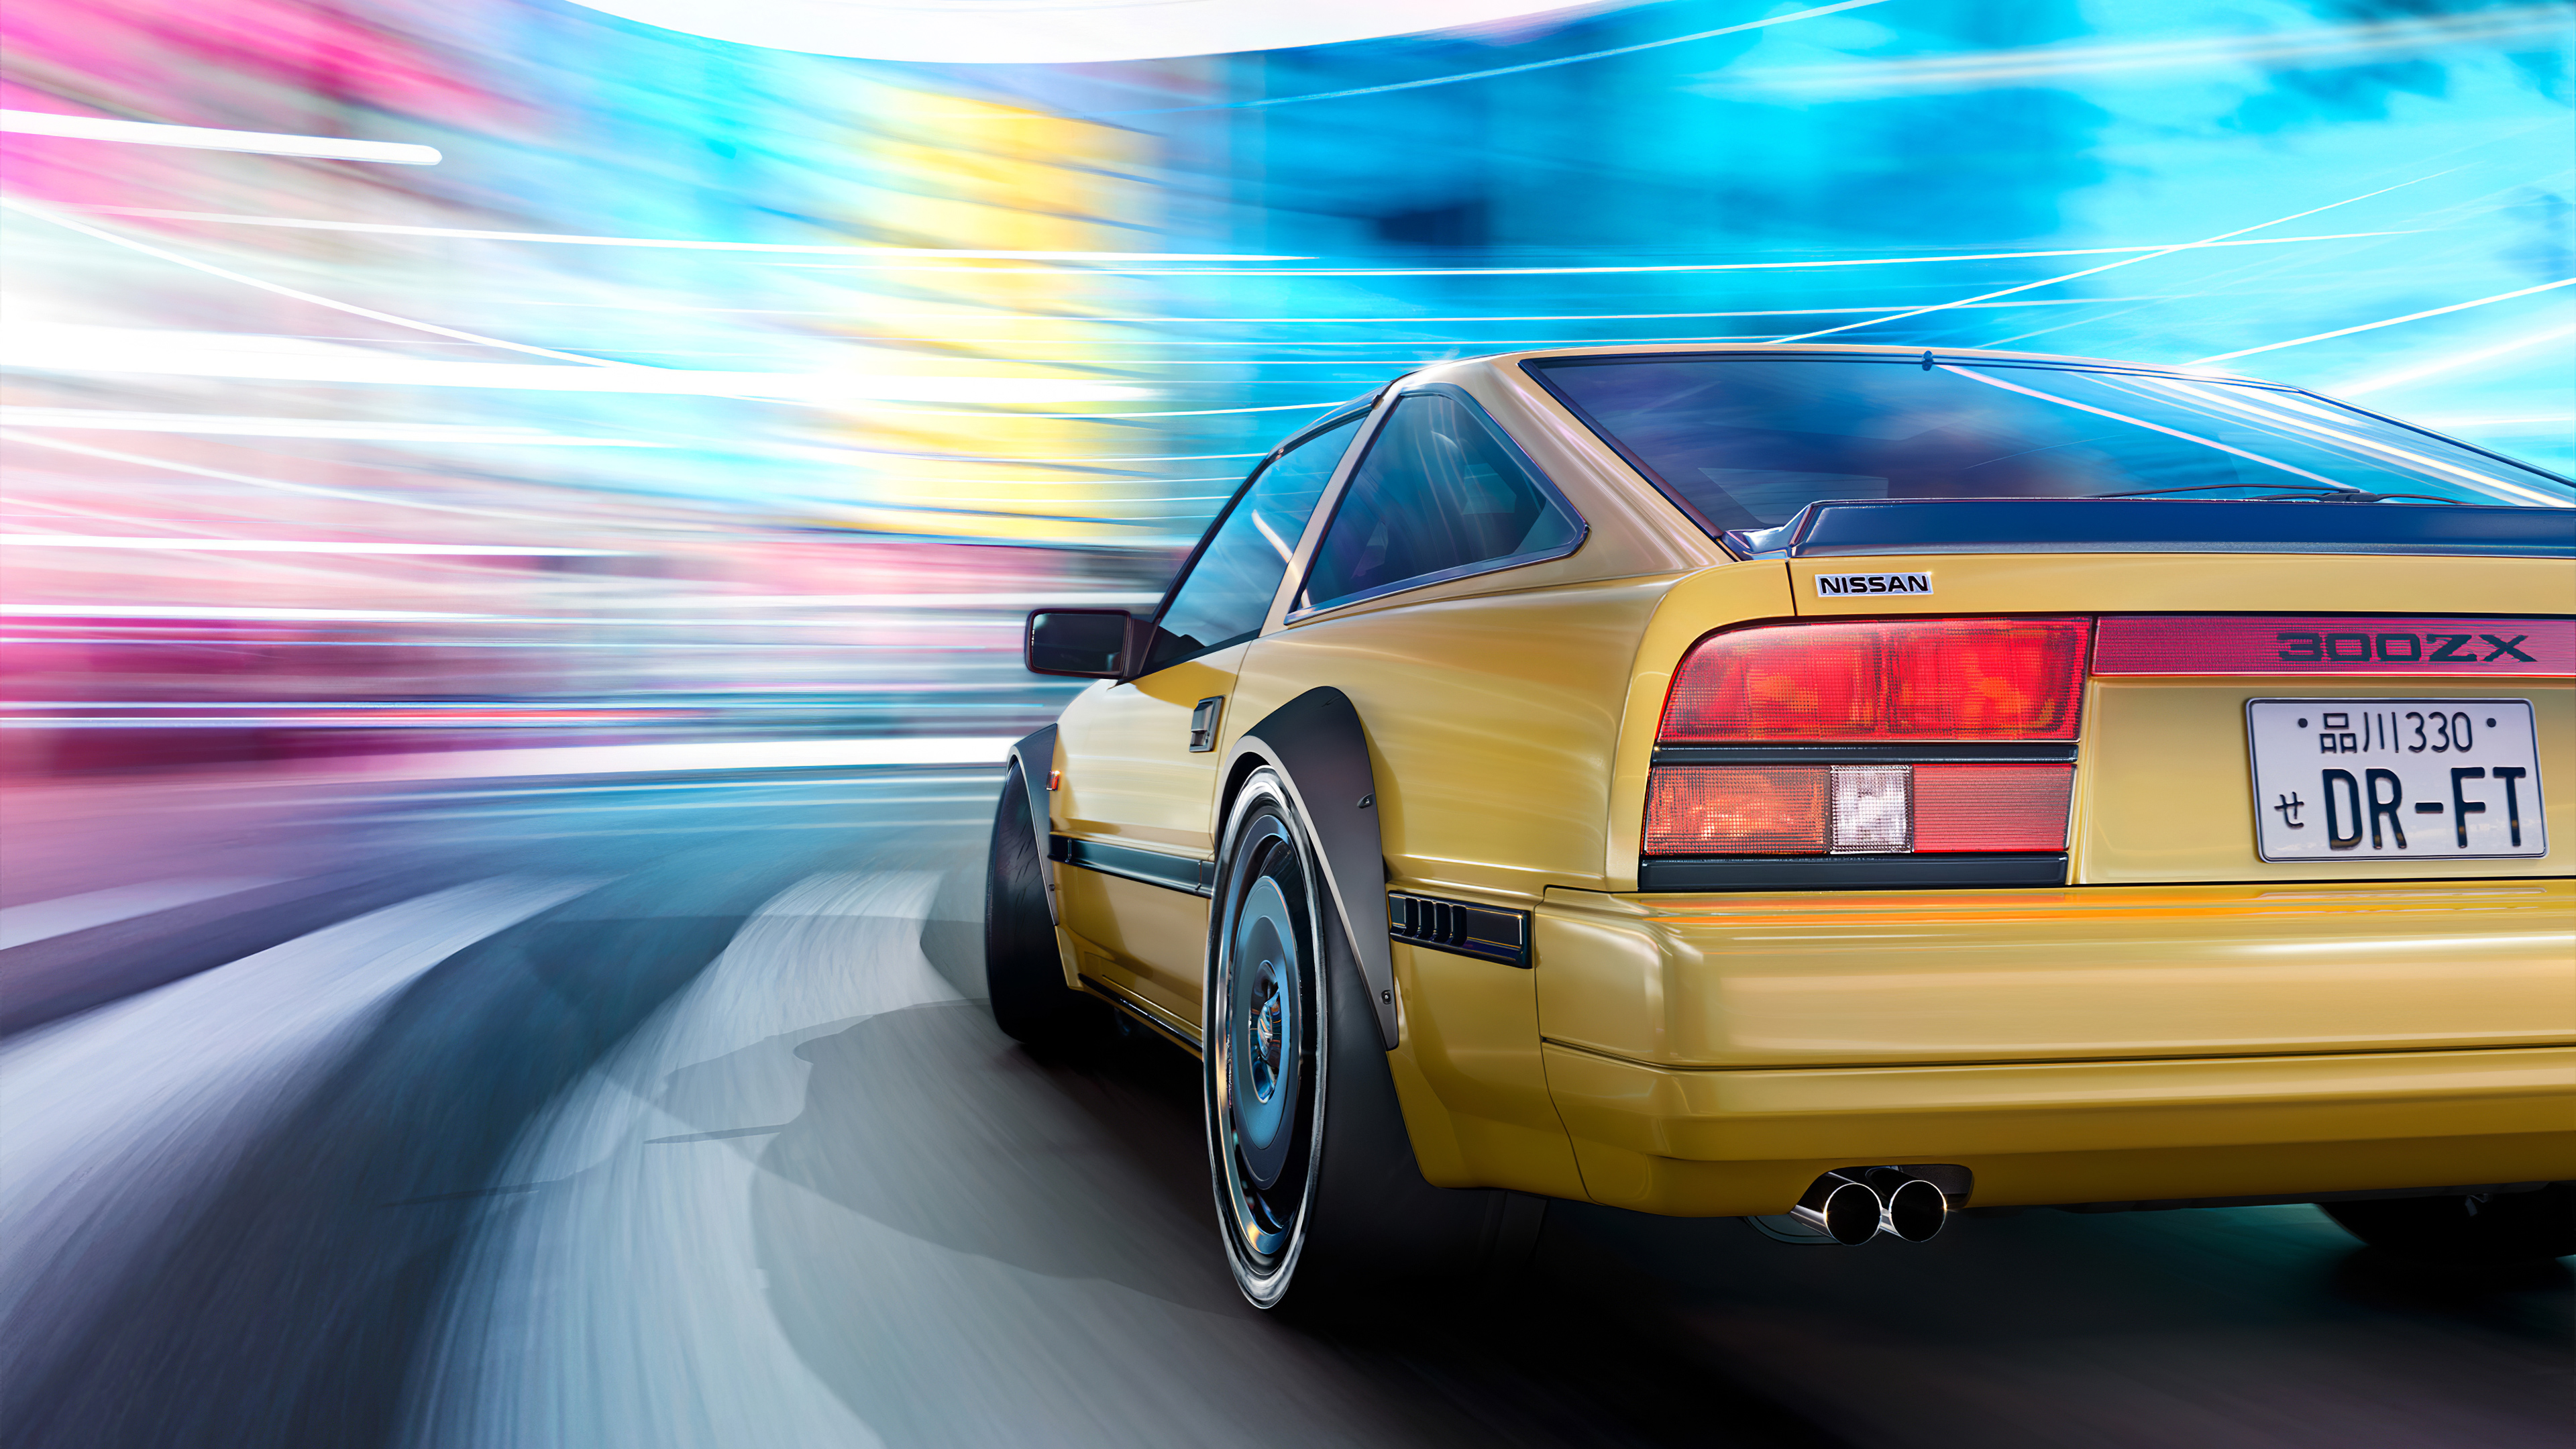 Nissan 300 Zx In Motion Blur 4k, HD Cars, 4k Wallpapers, Images ...